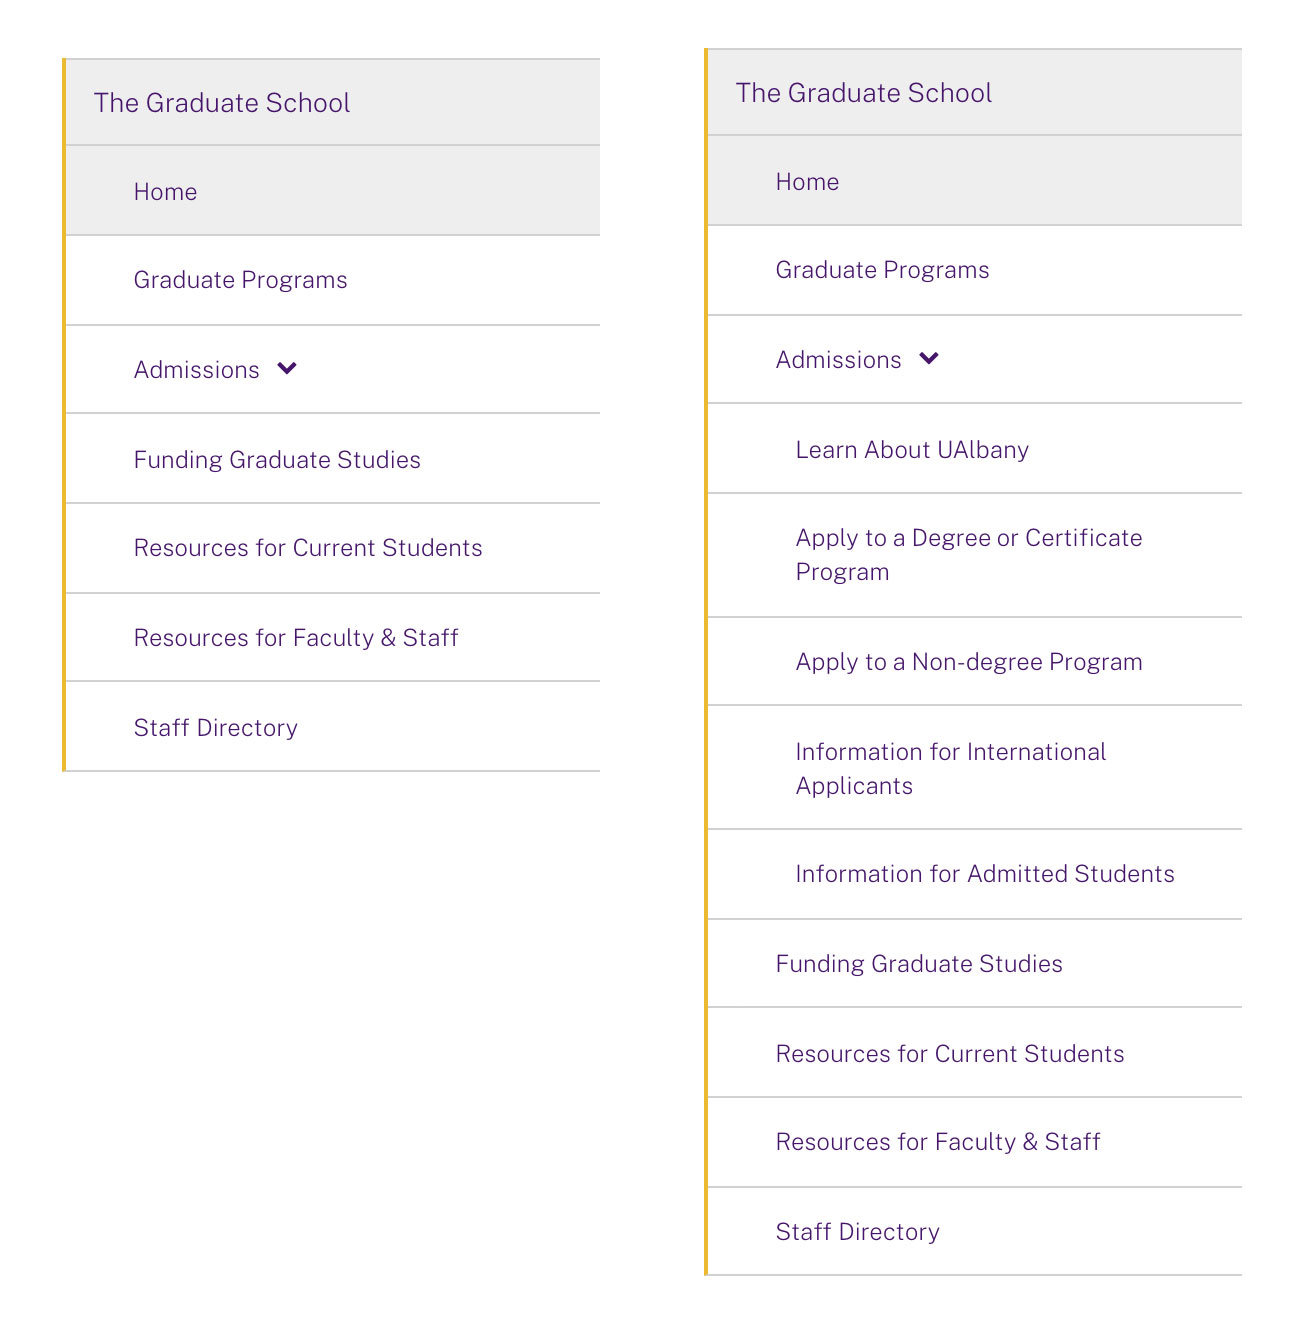 Two screenshots of the Graduate School's site menu, showing it's seven main items and what it looks like when the Admissions item is expanded to reveal five child pages